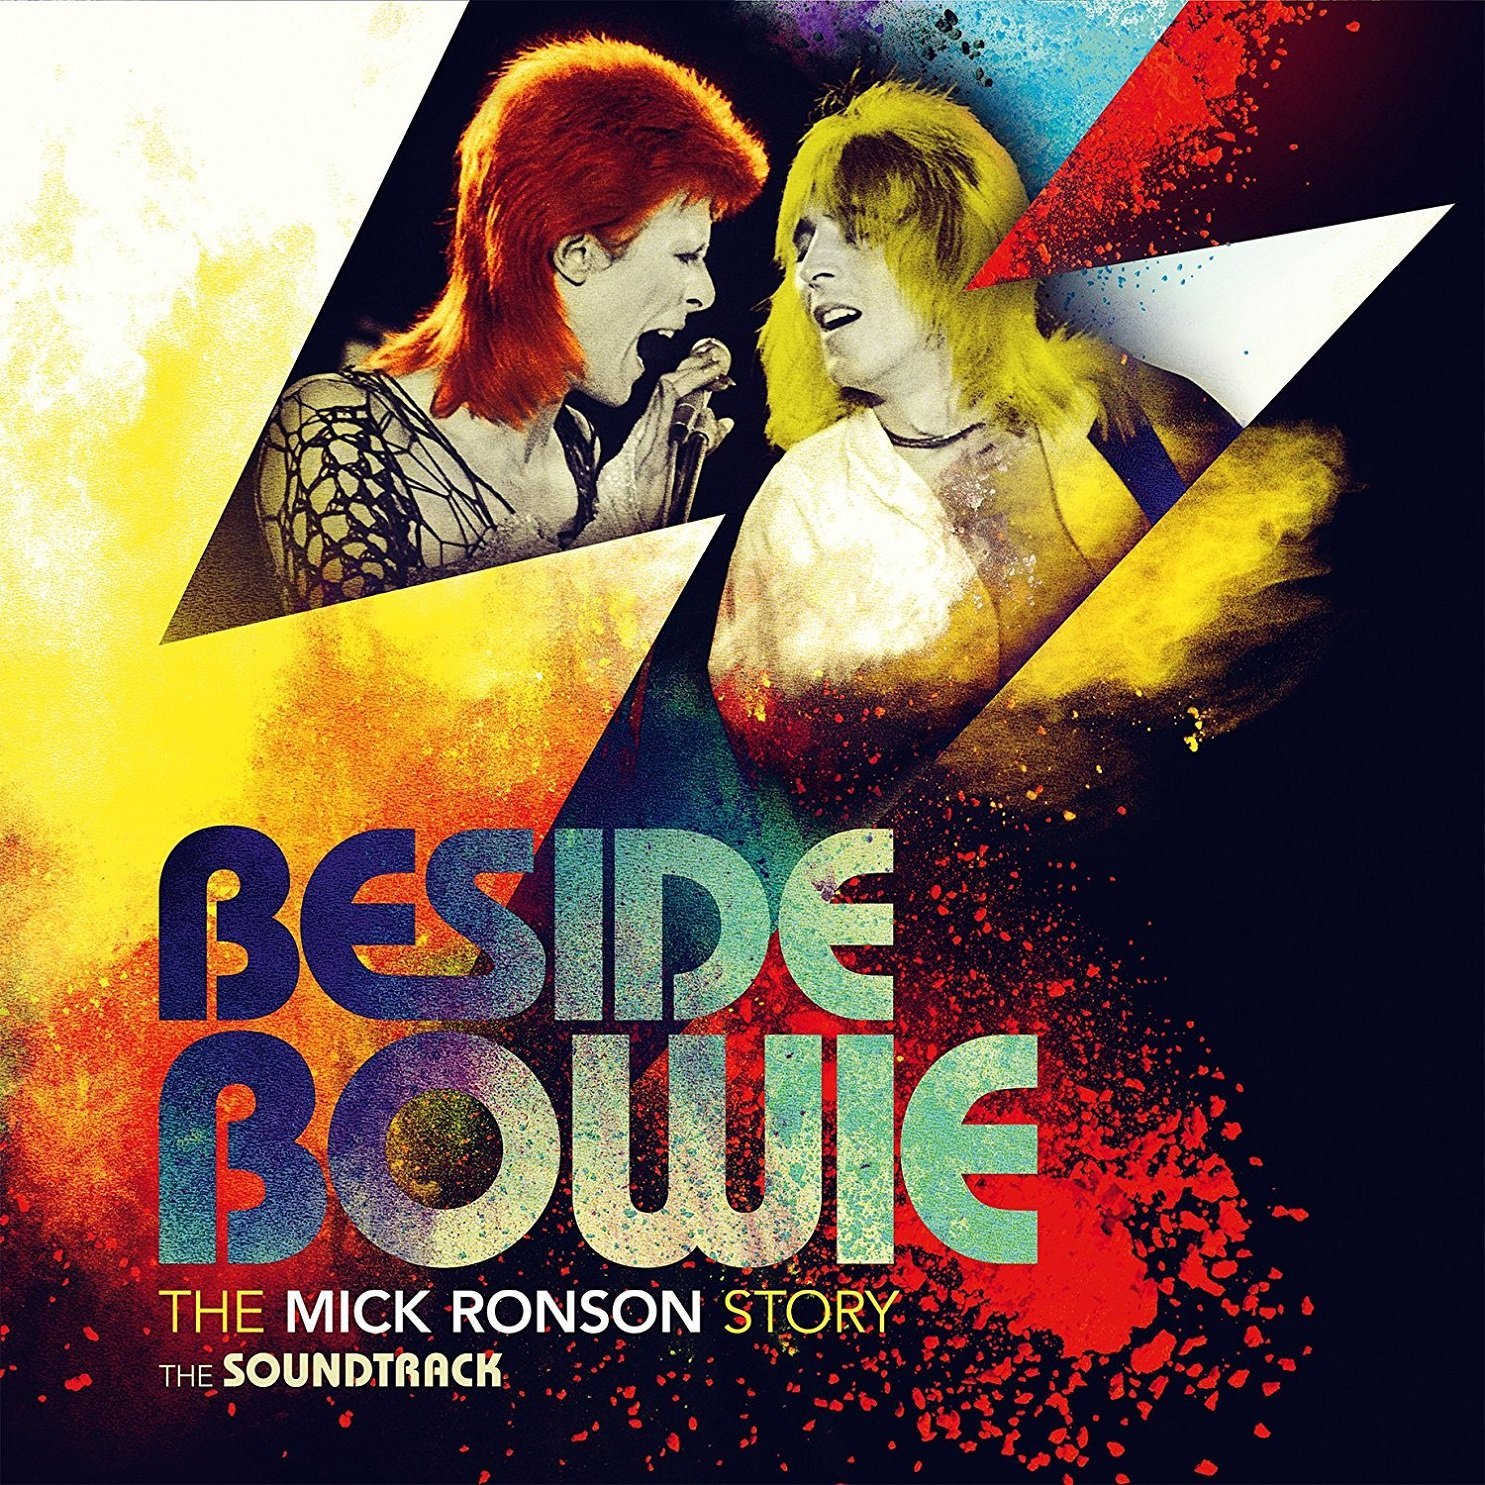 Beside Bowie, The Mick Ronson Story